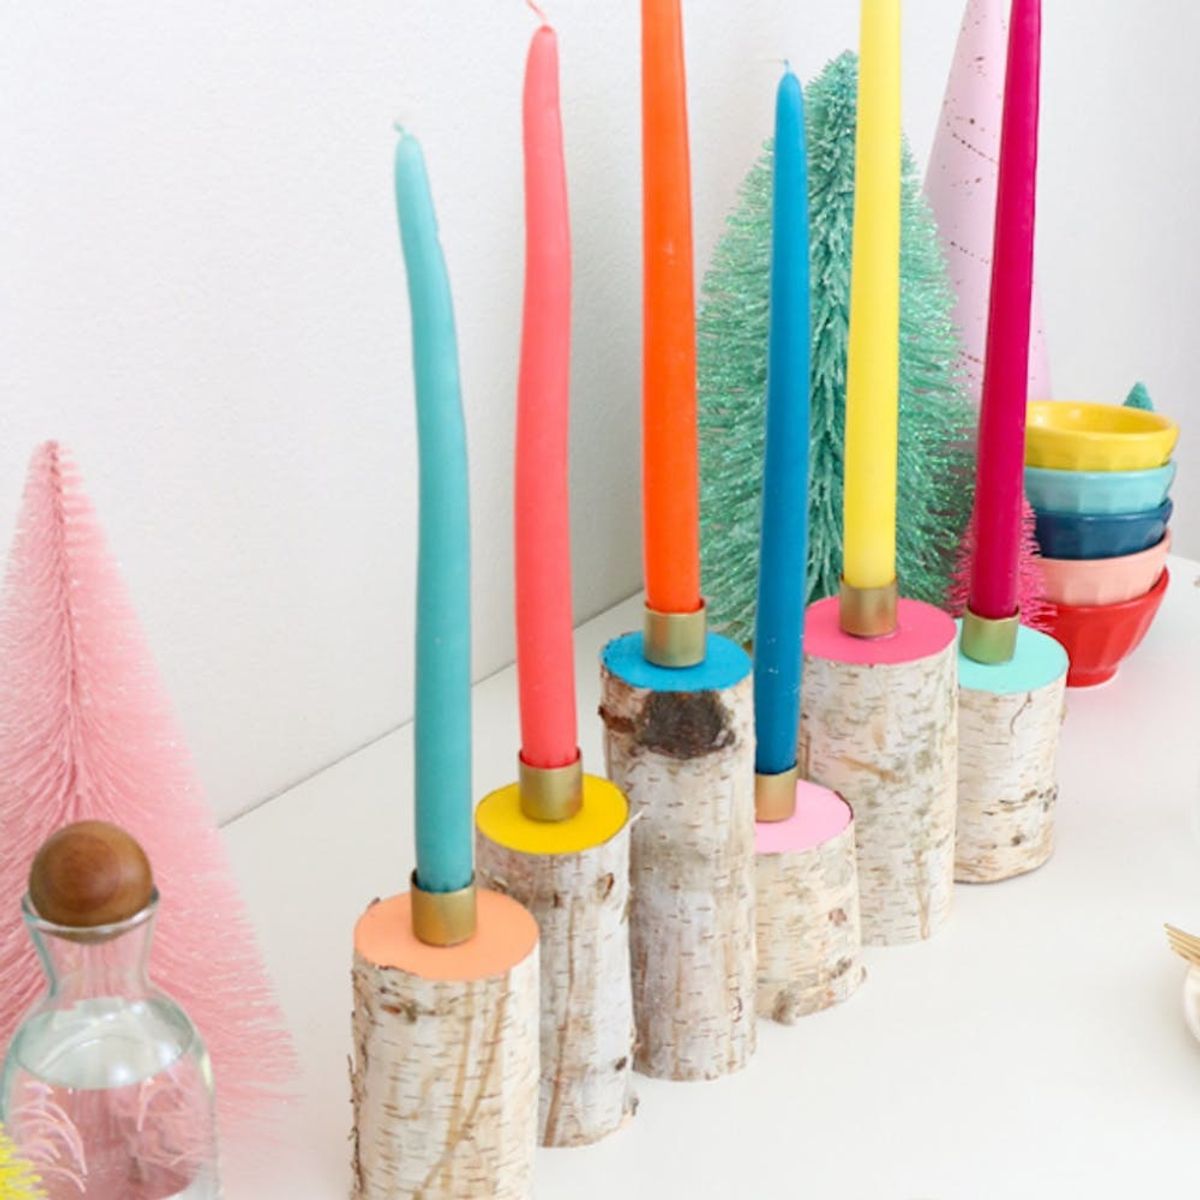 What to Make This Weekend: 3D Gem Ornaments, Birch Wood Candles + More